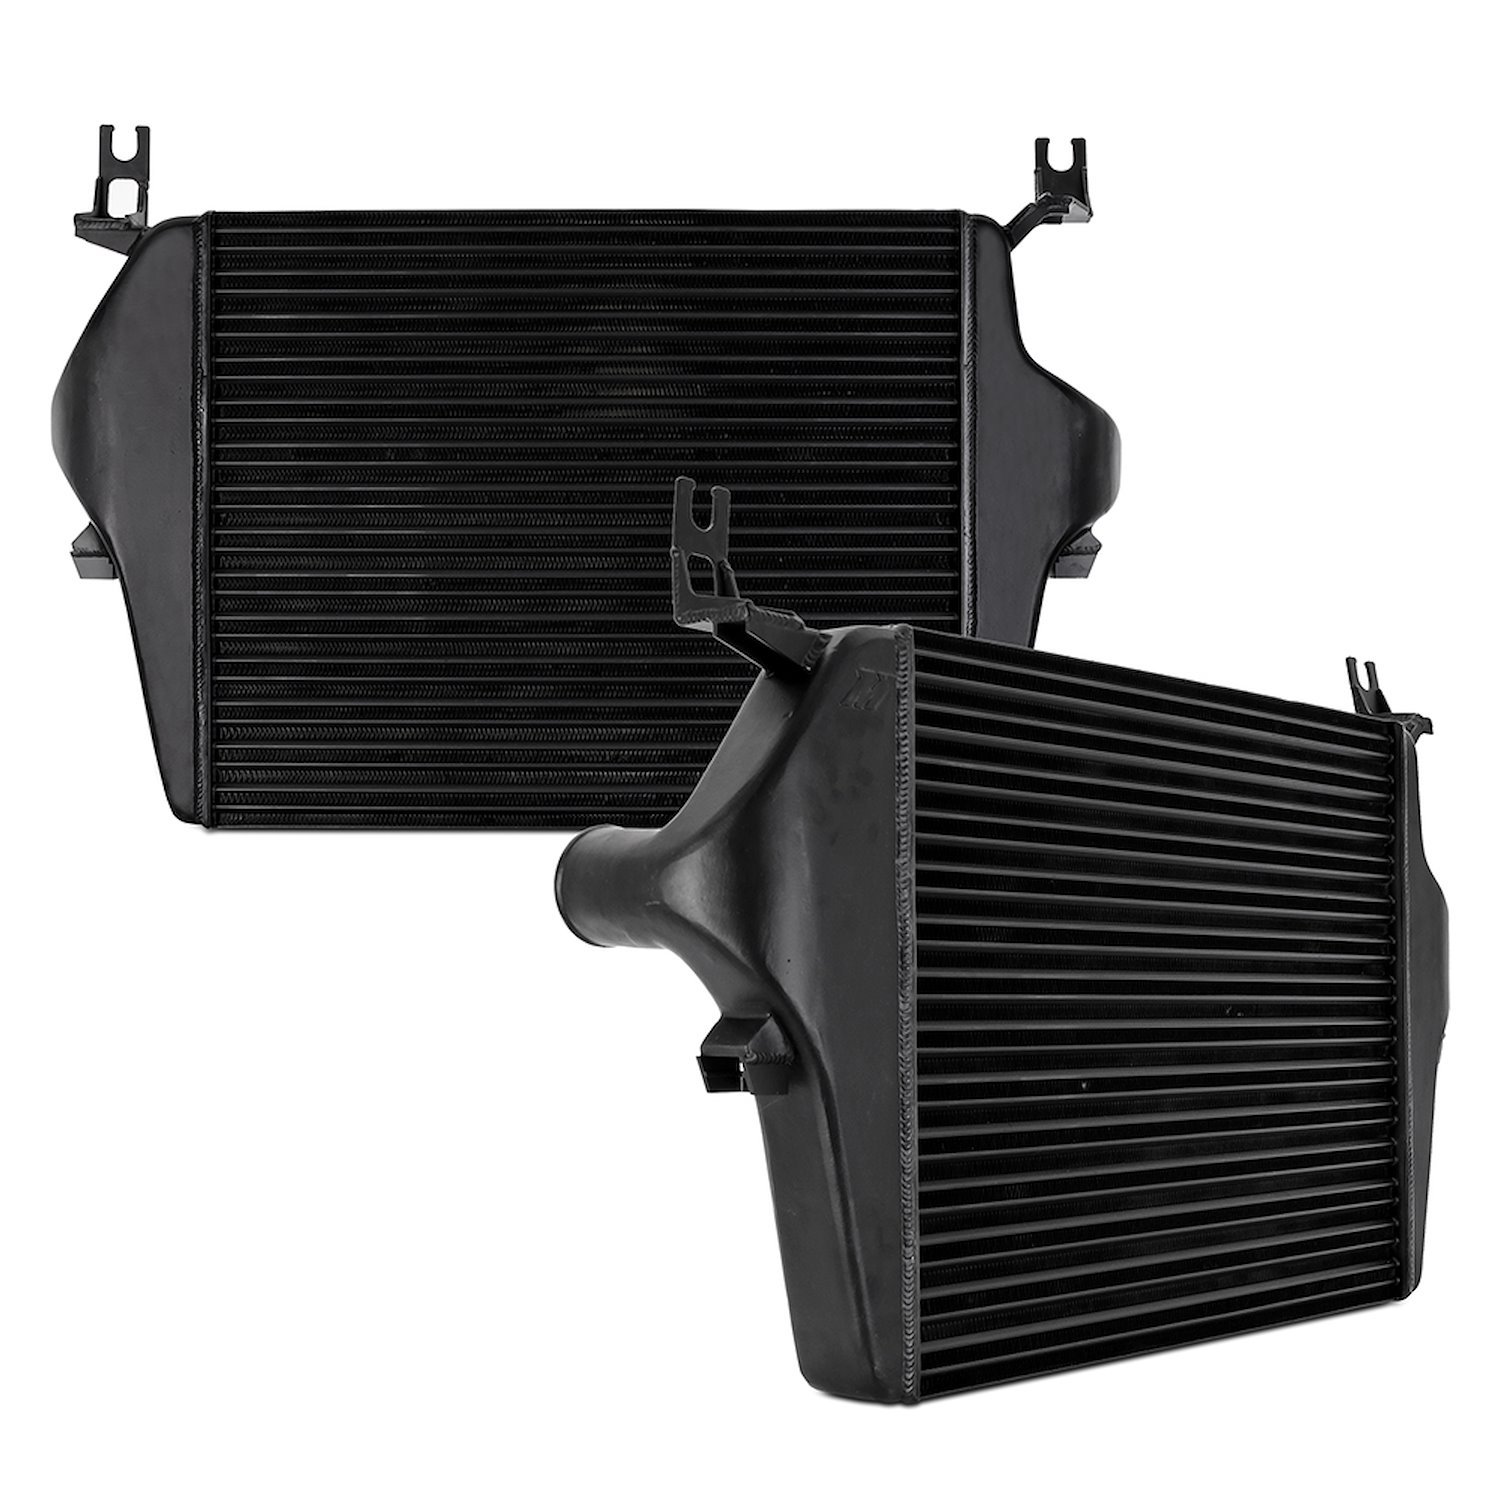 MMINT-F2D-03TBK Cast End Tank Replacement Intercooler, Fits Ford 6.0L Powerstroke 2003-2007